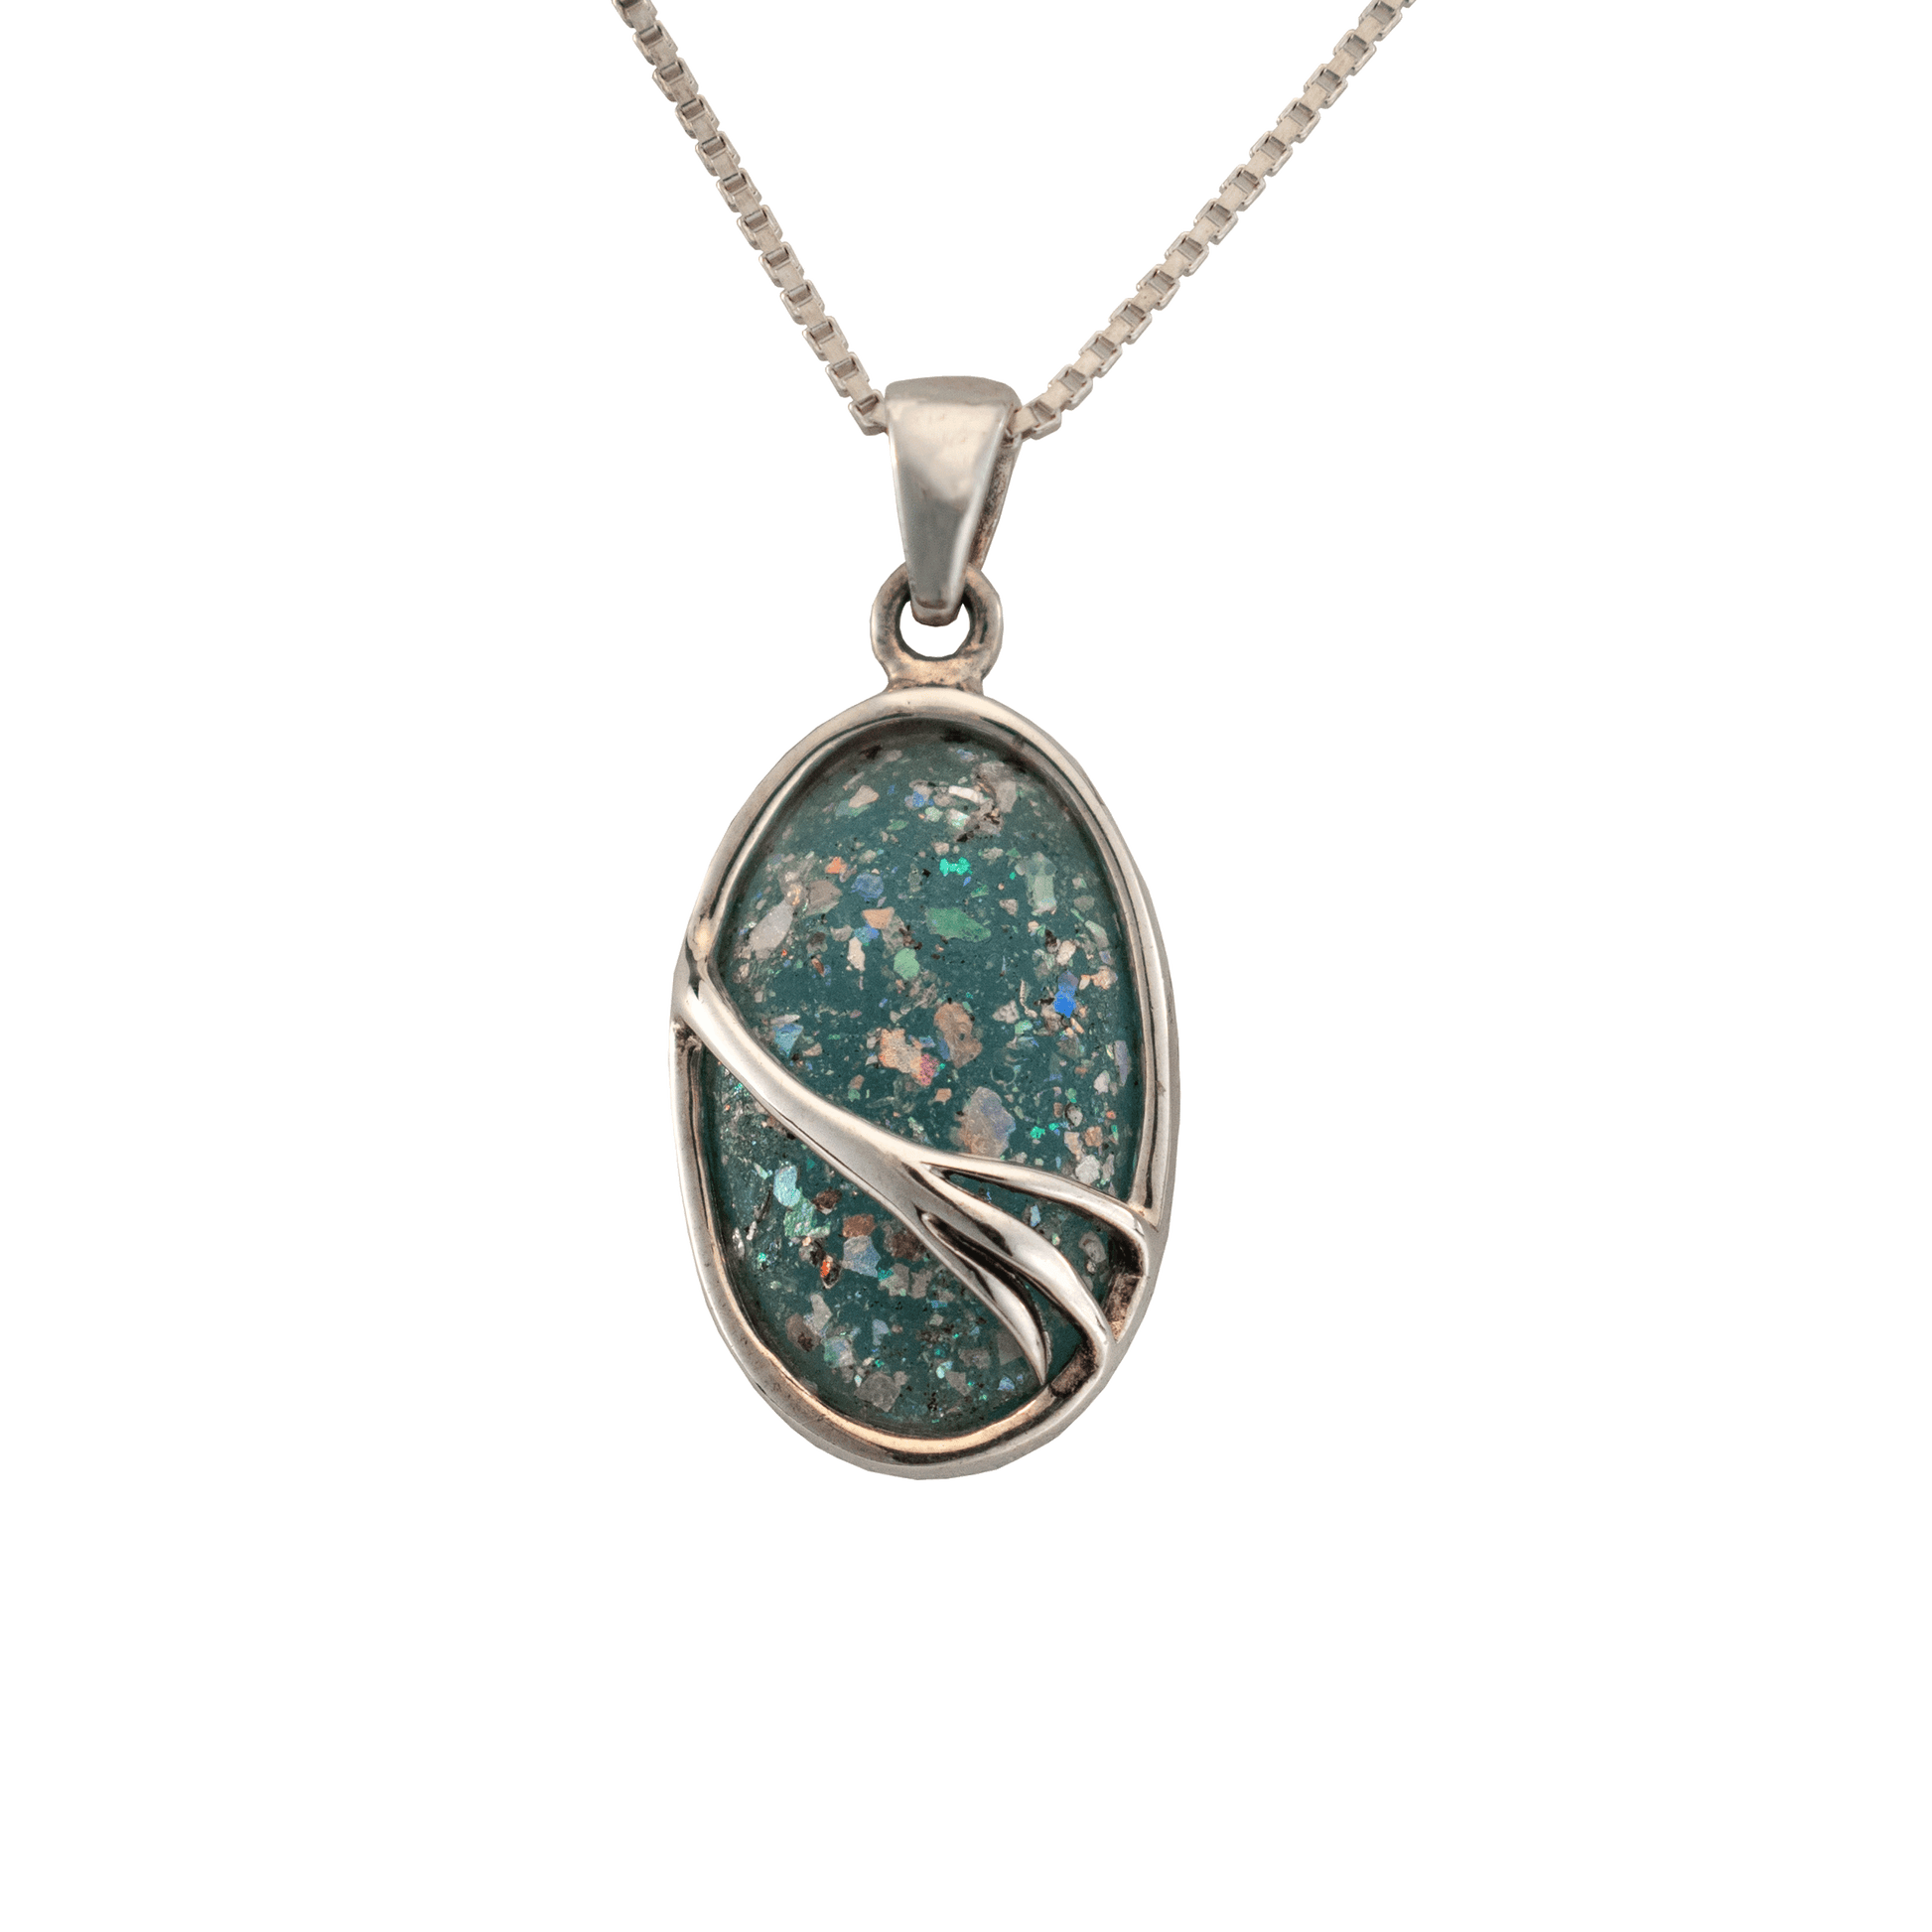 Oval Roman Glass pendant surrounded by decorative silver and silver chain